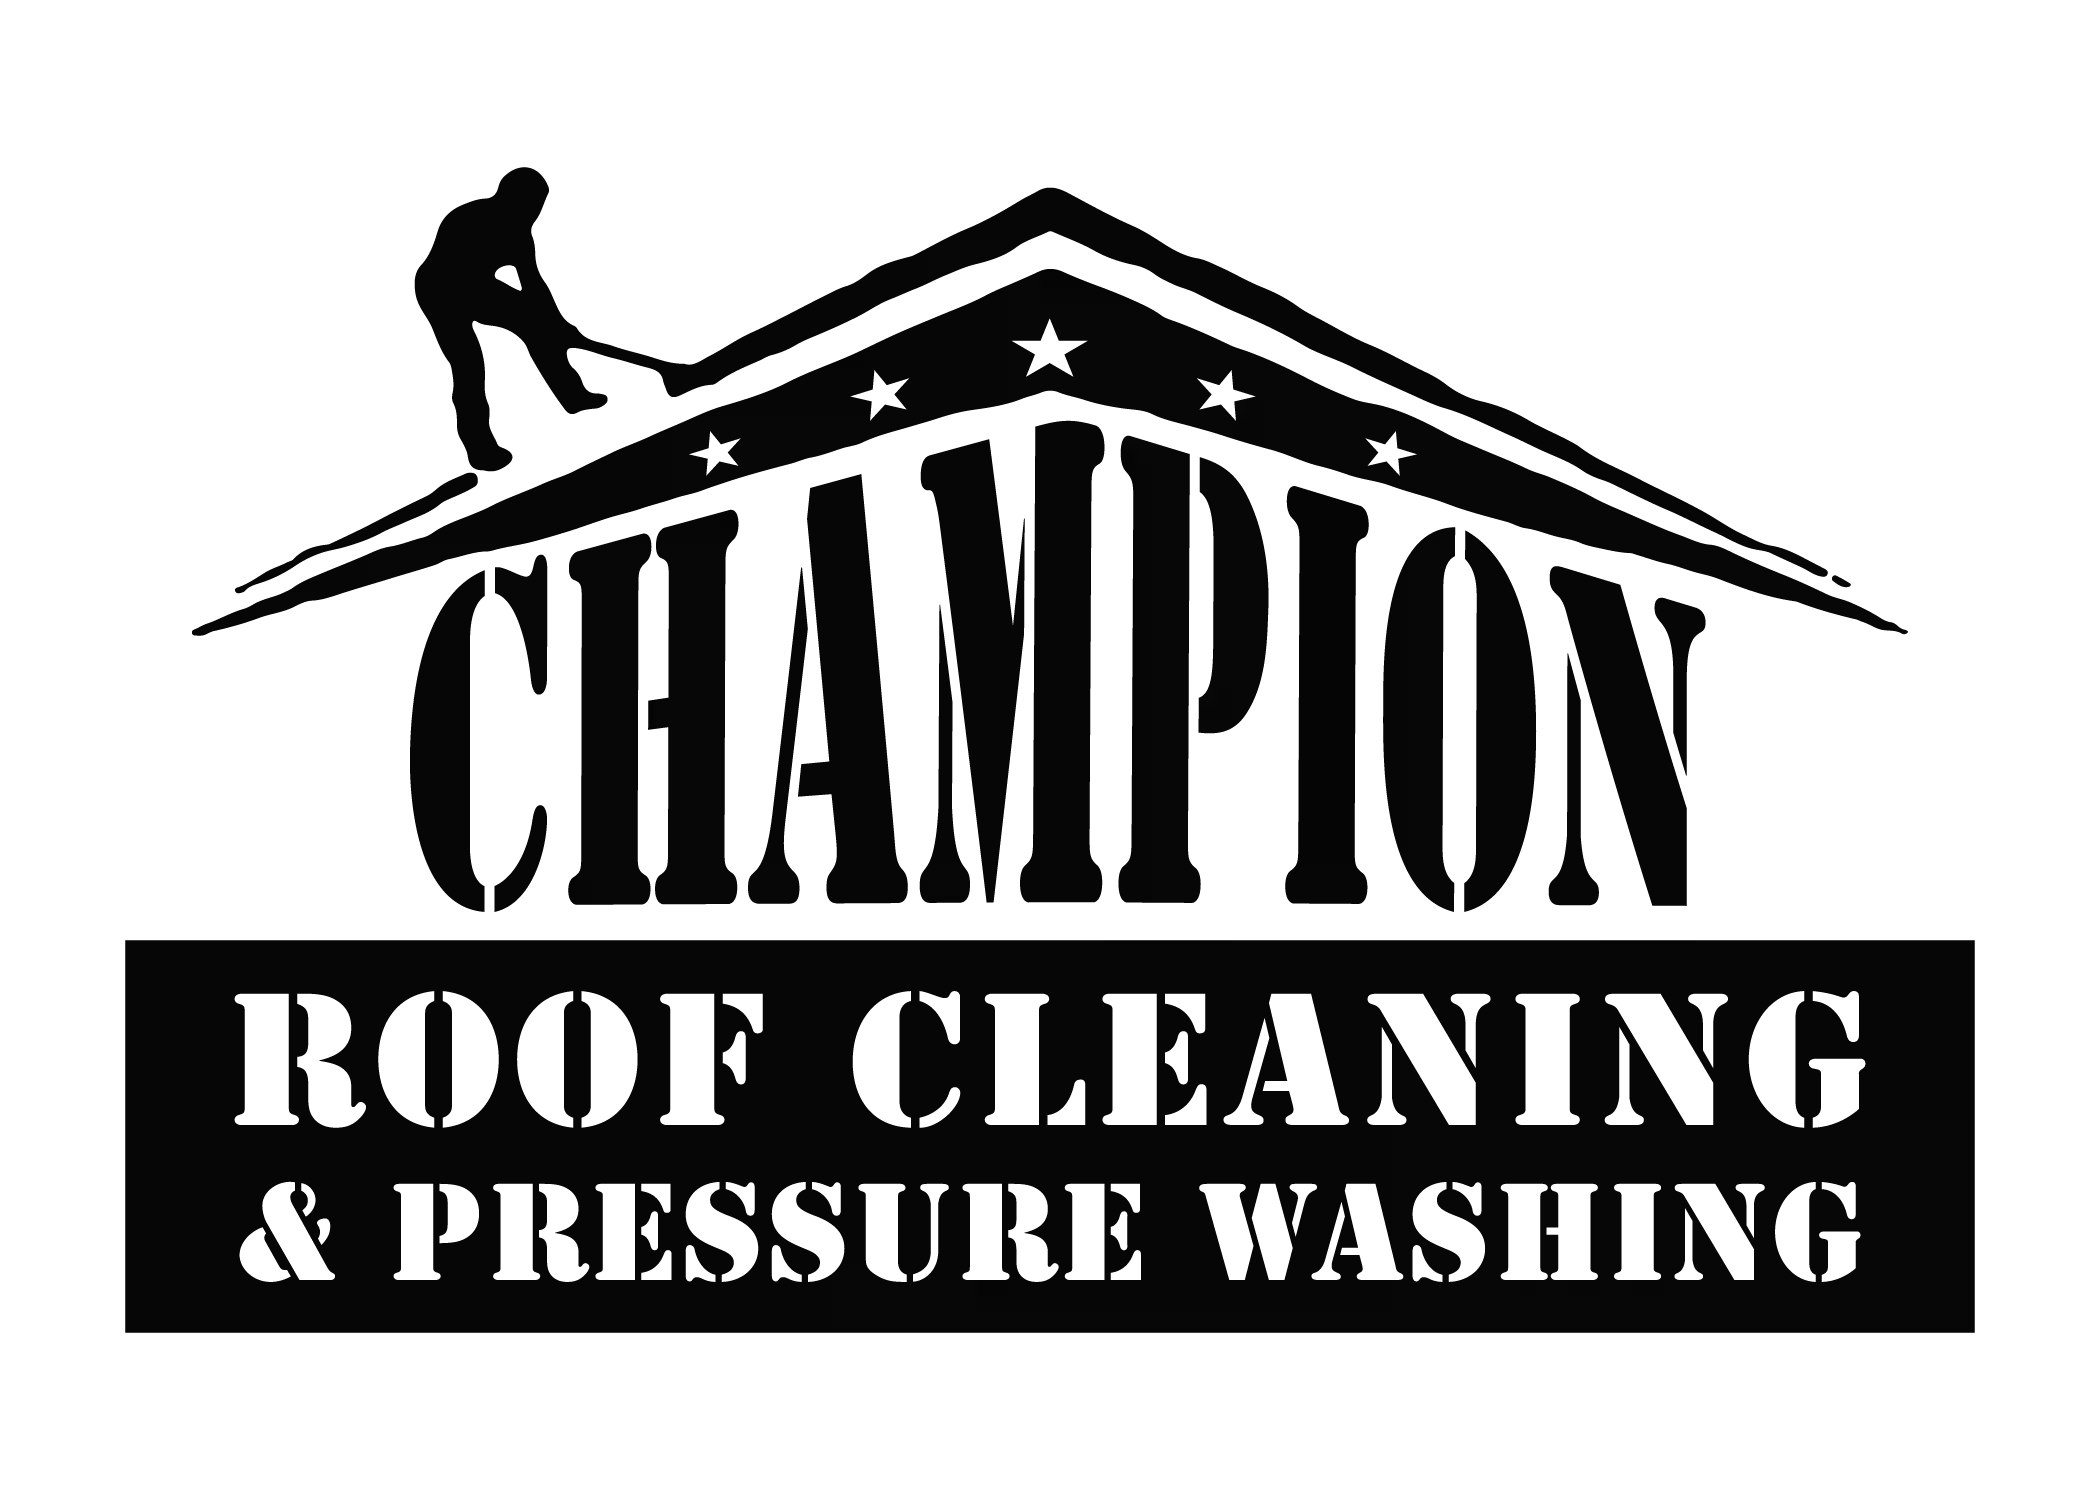 Champion Roof Cleaning and Pressure Washing